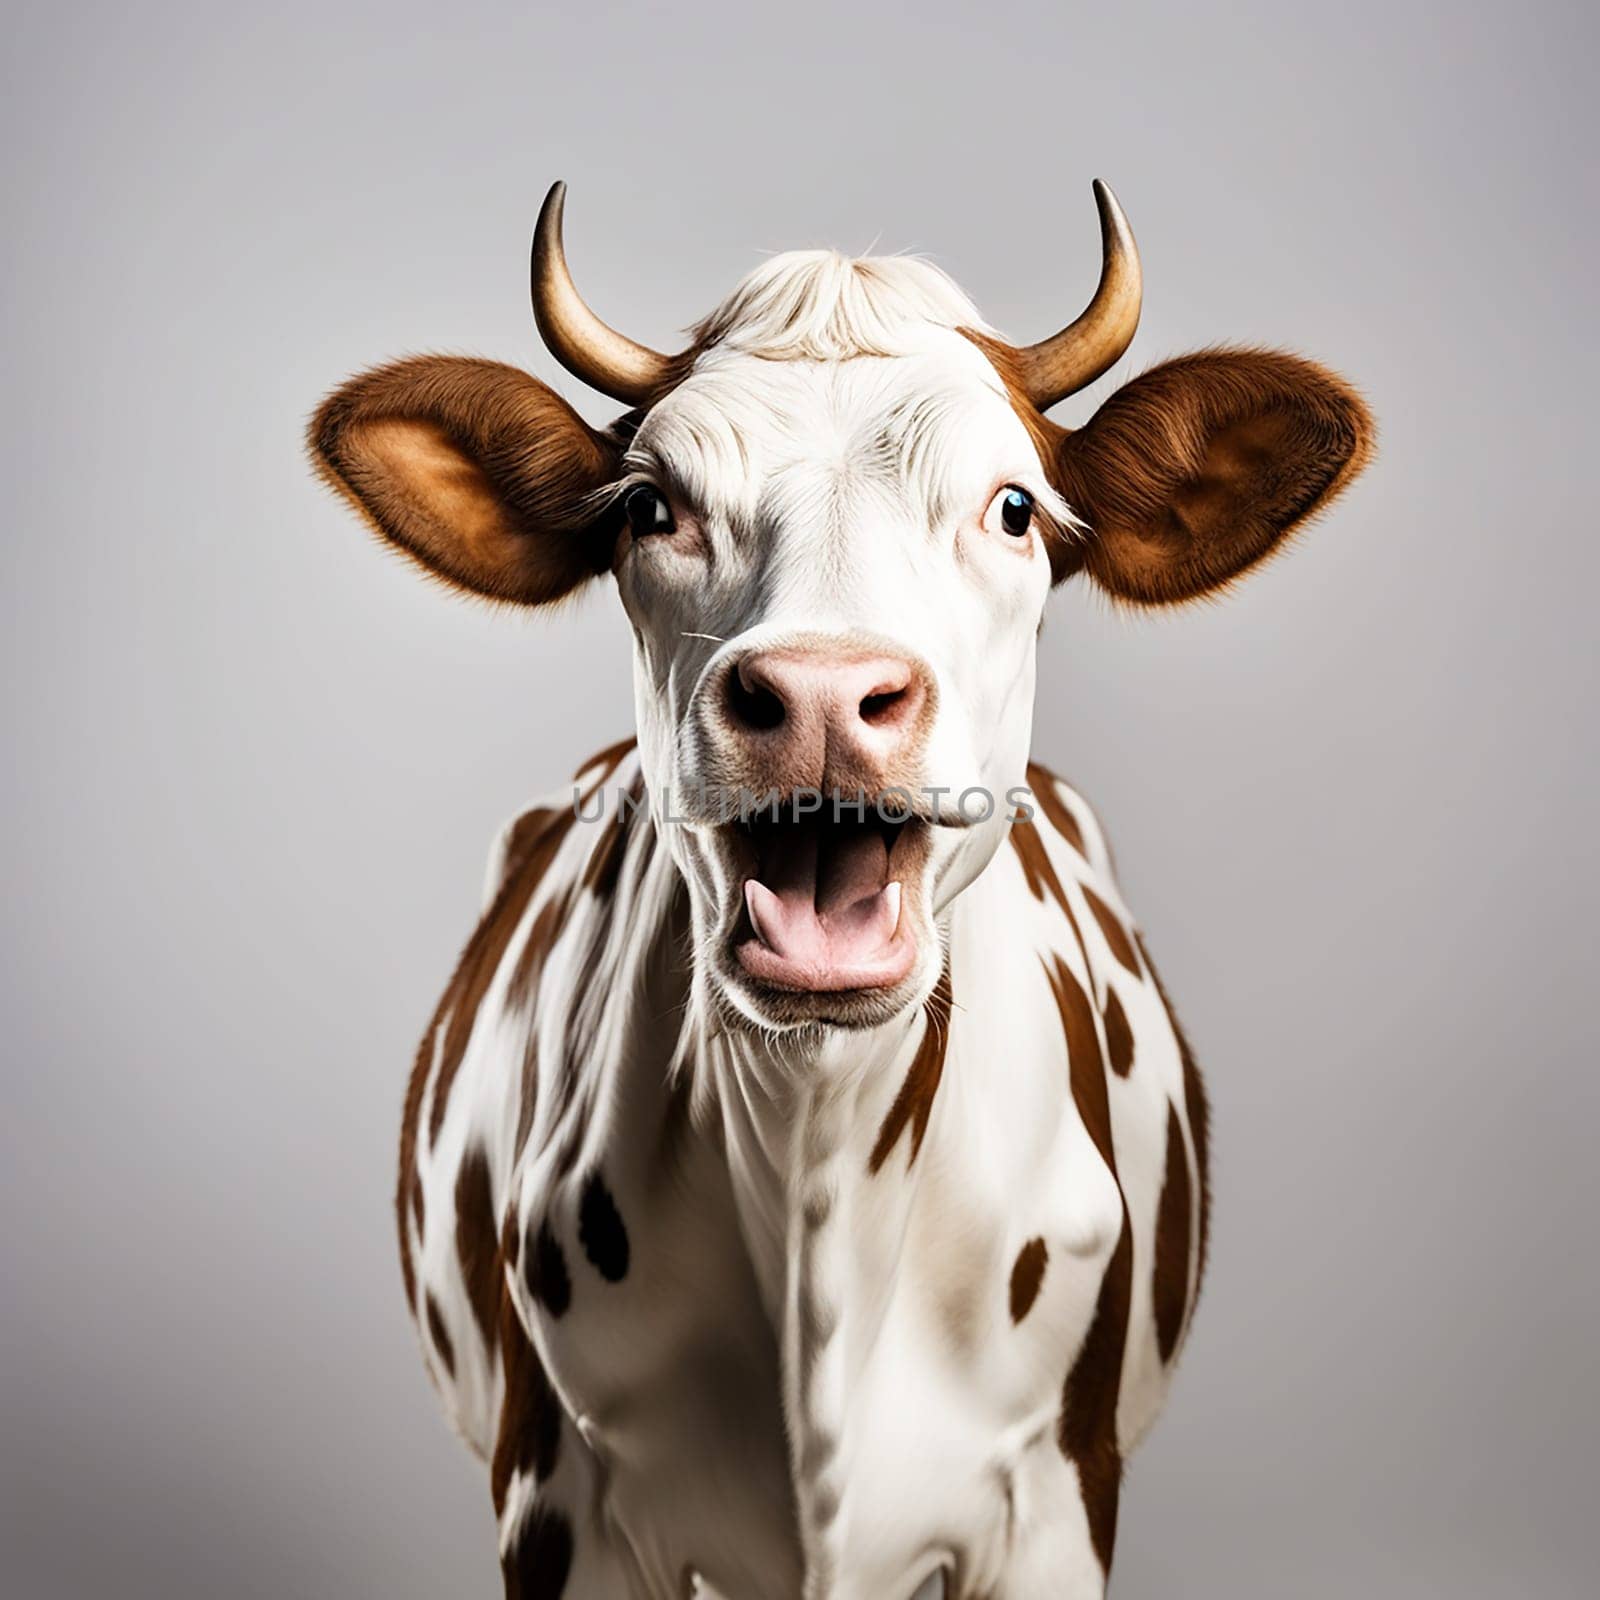 Amusing Portrait cow Isolated on White Background